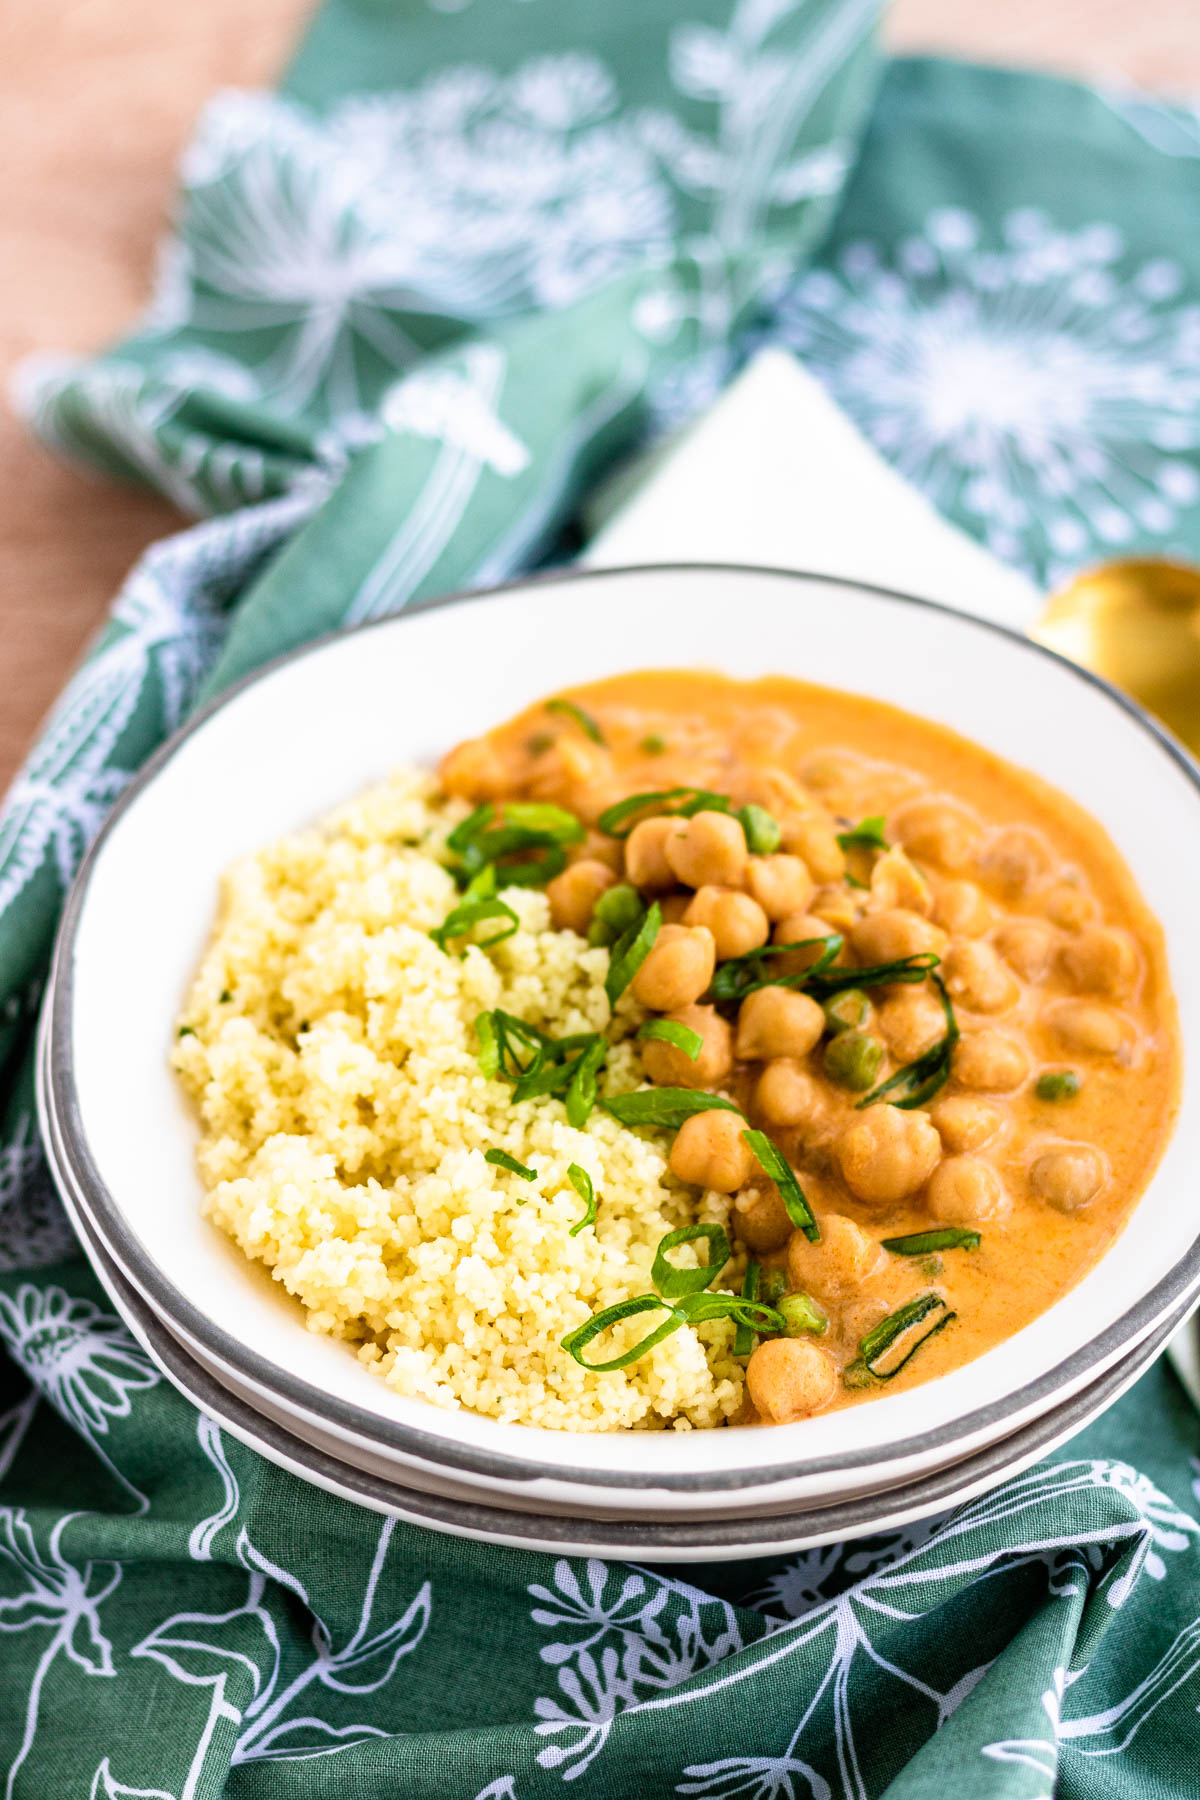 Instant Pot Thai Red Curry with Chickpeas